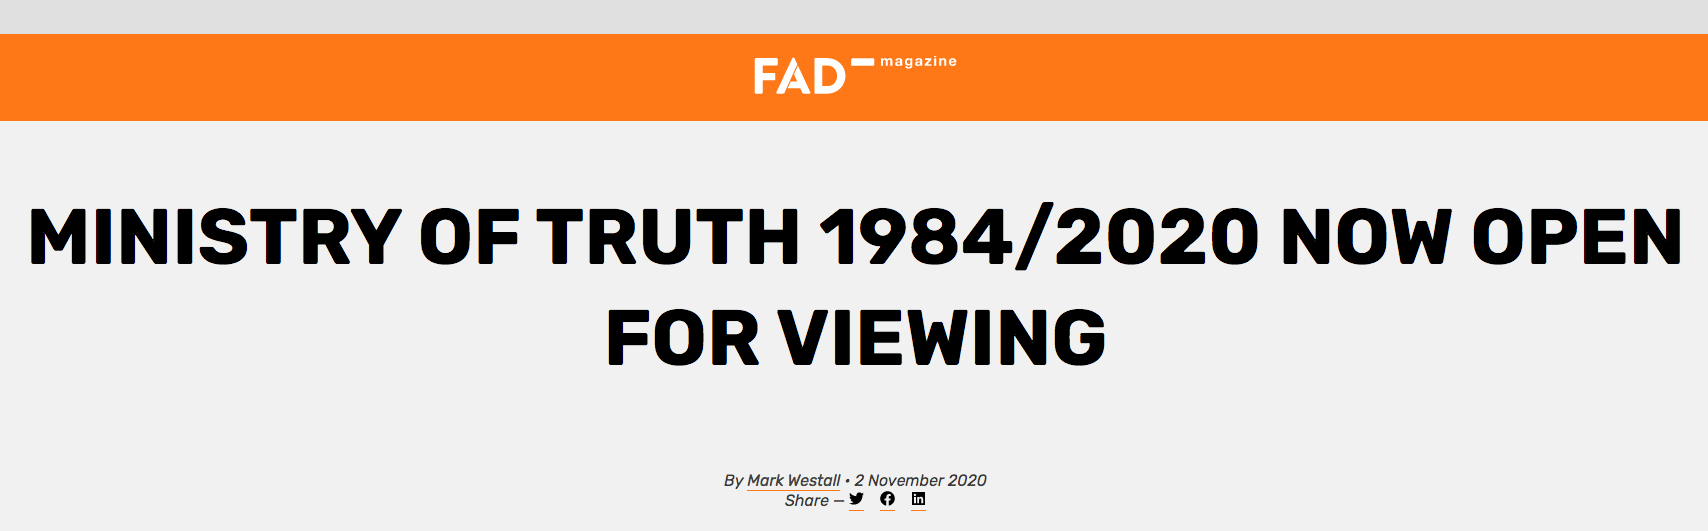 Ministry of Truth 1984/2020 Now Open for Viewing - FAD Magazine 2020